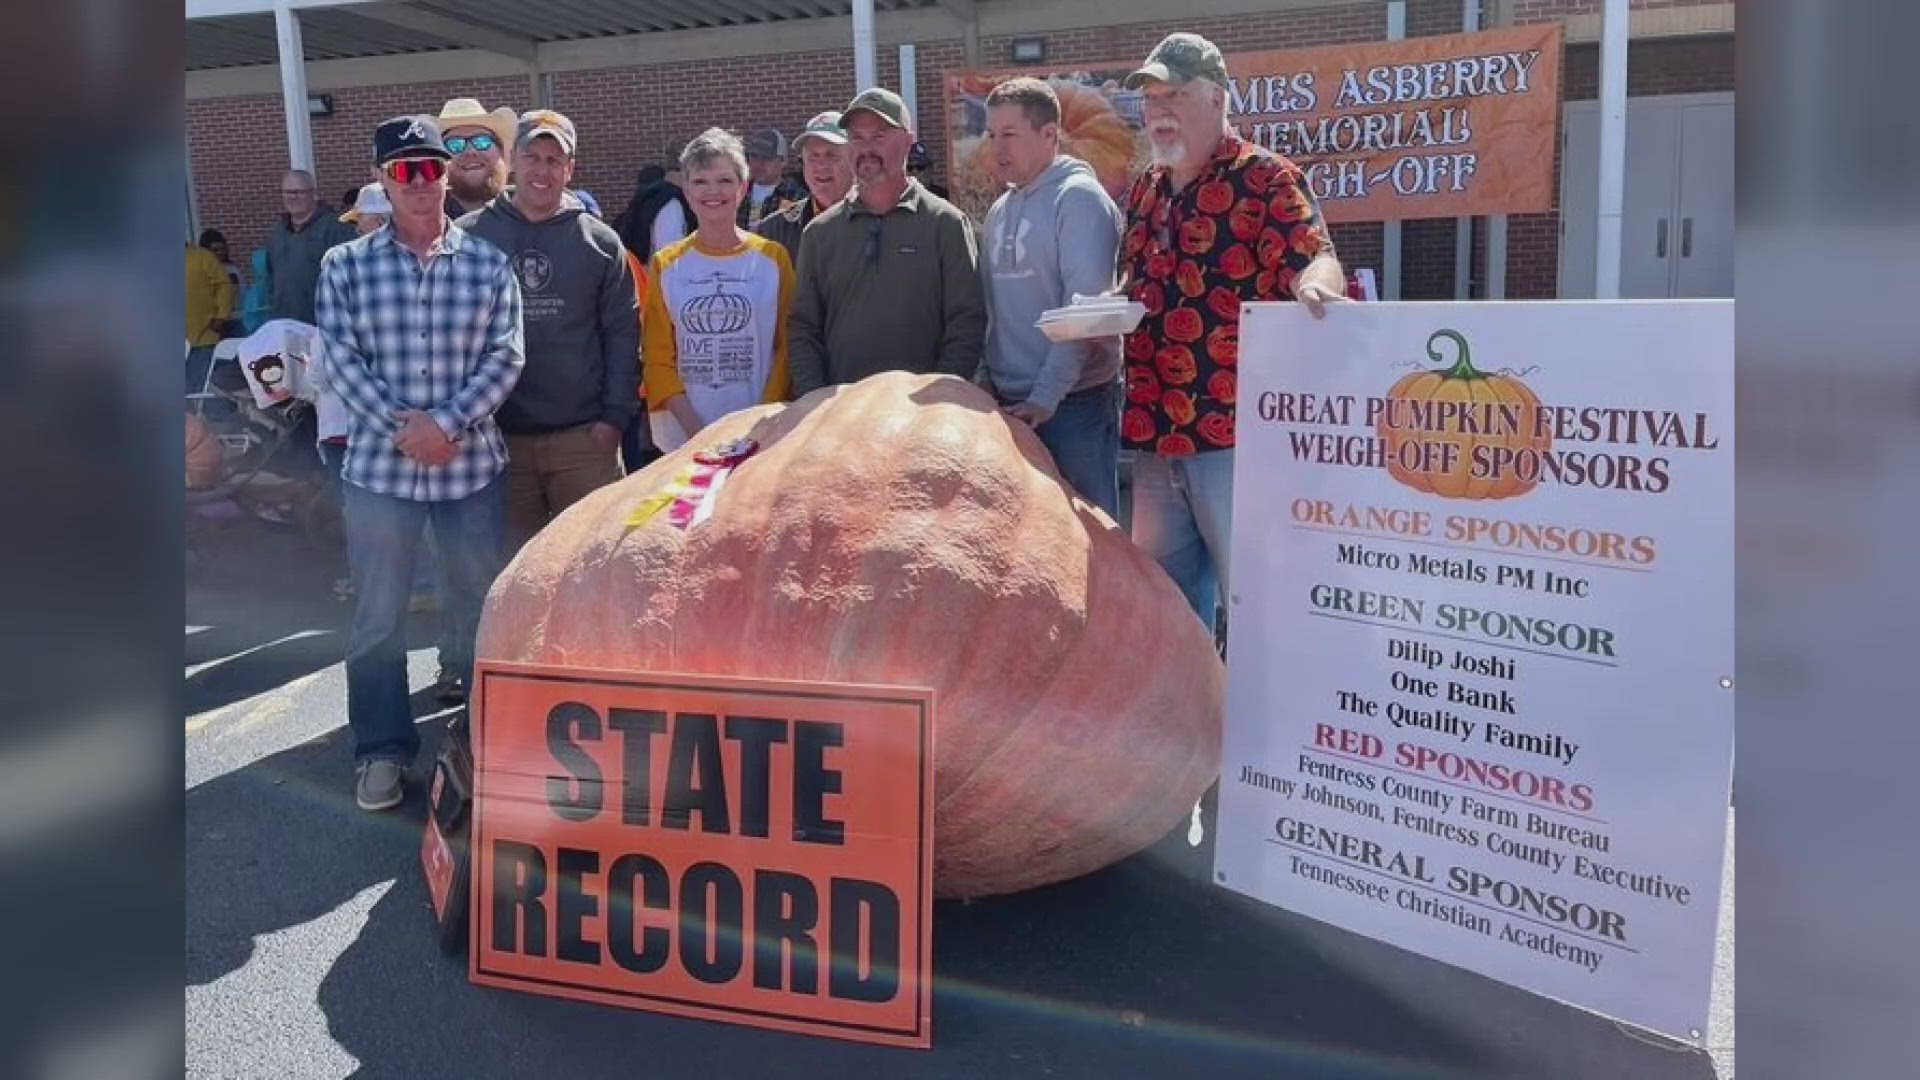 The pumpkin was grown by Jason Terry and weighs almost 2 tons. Terry's pumpkin now holds the state record for the largest pumpkin.